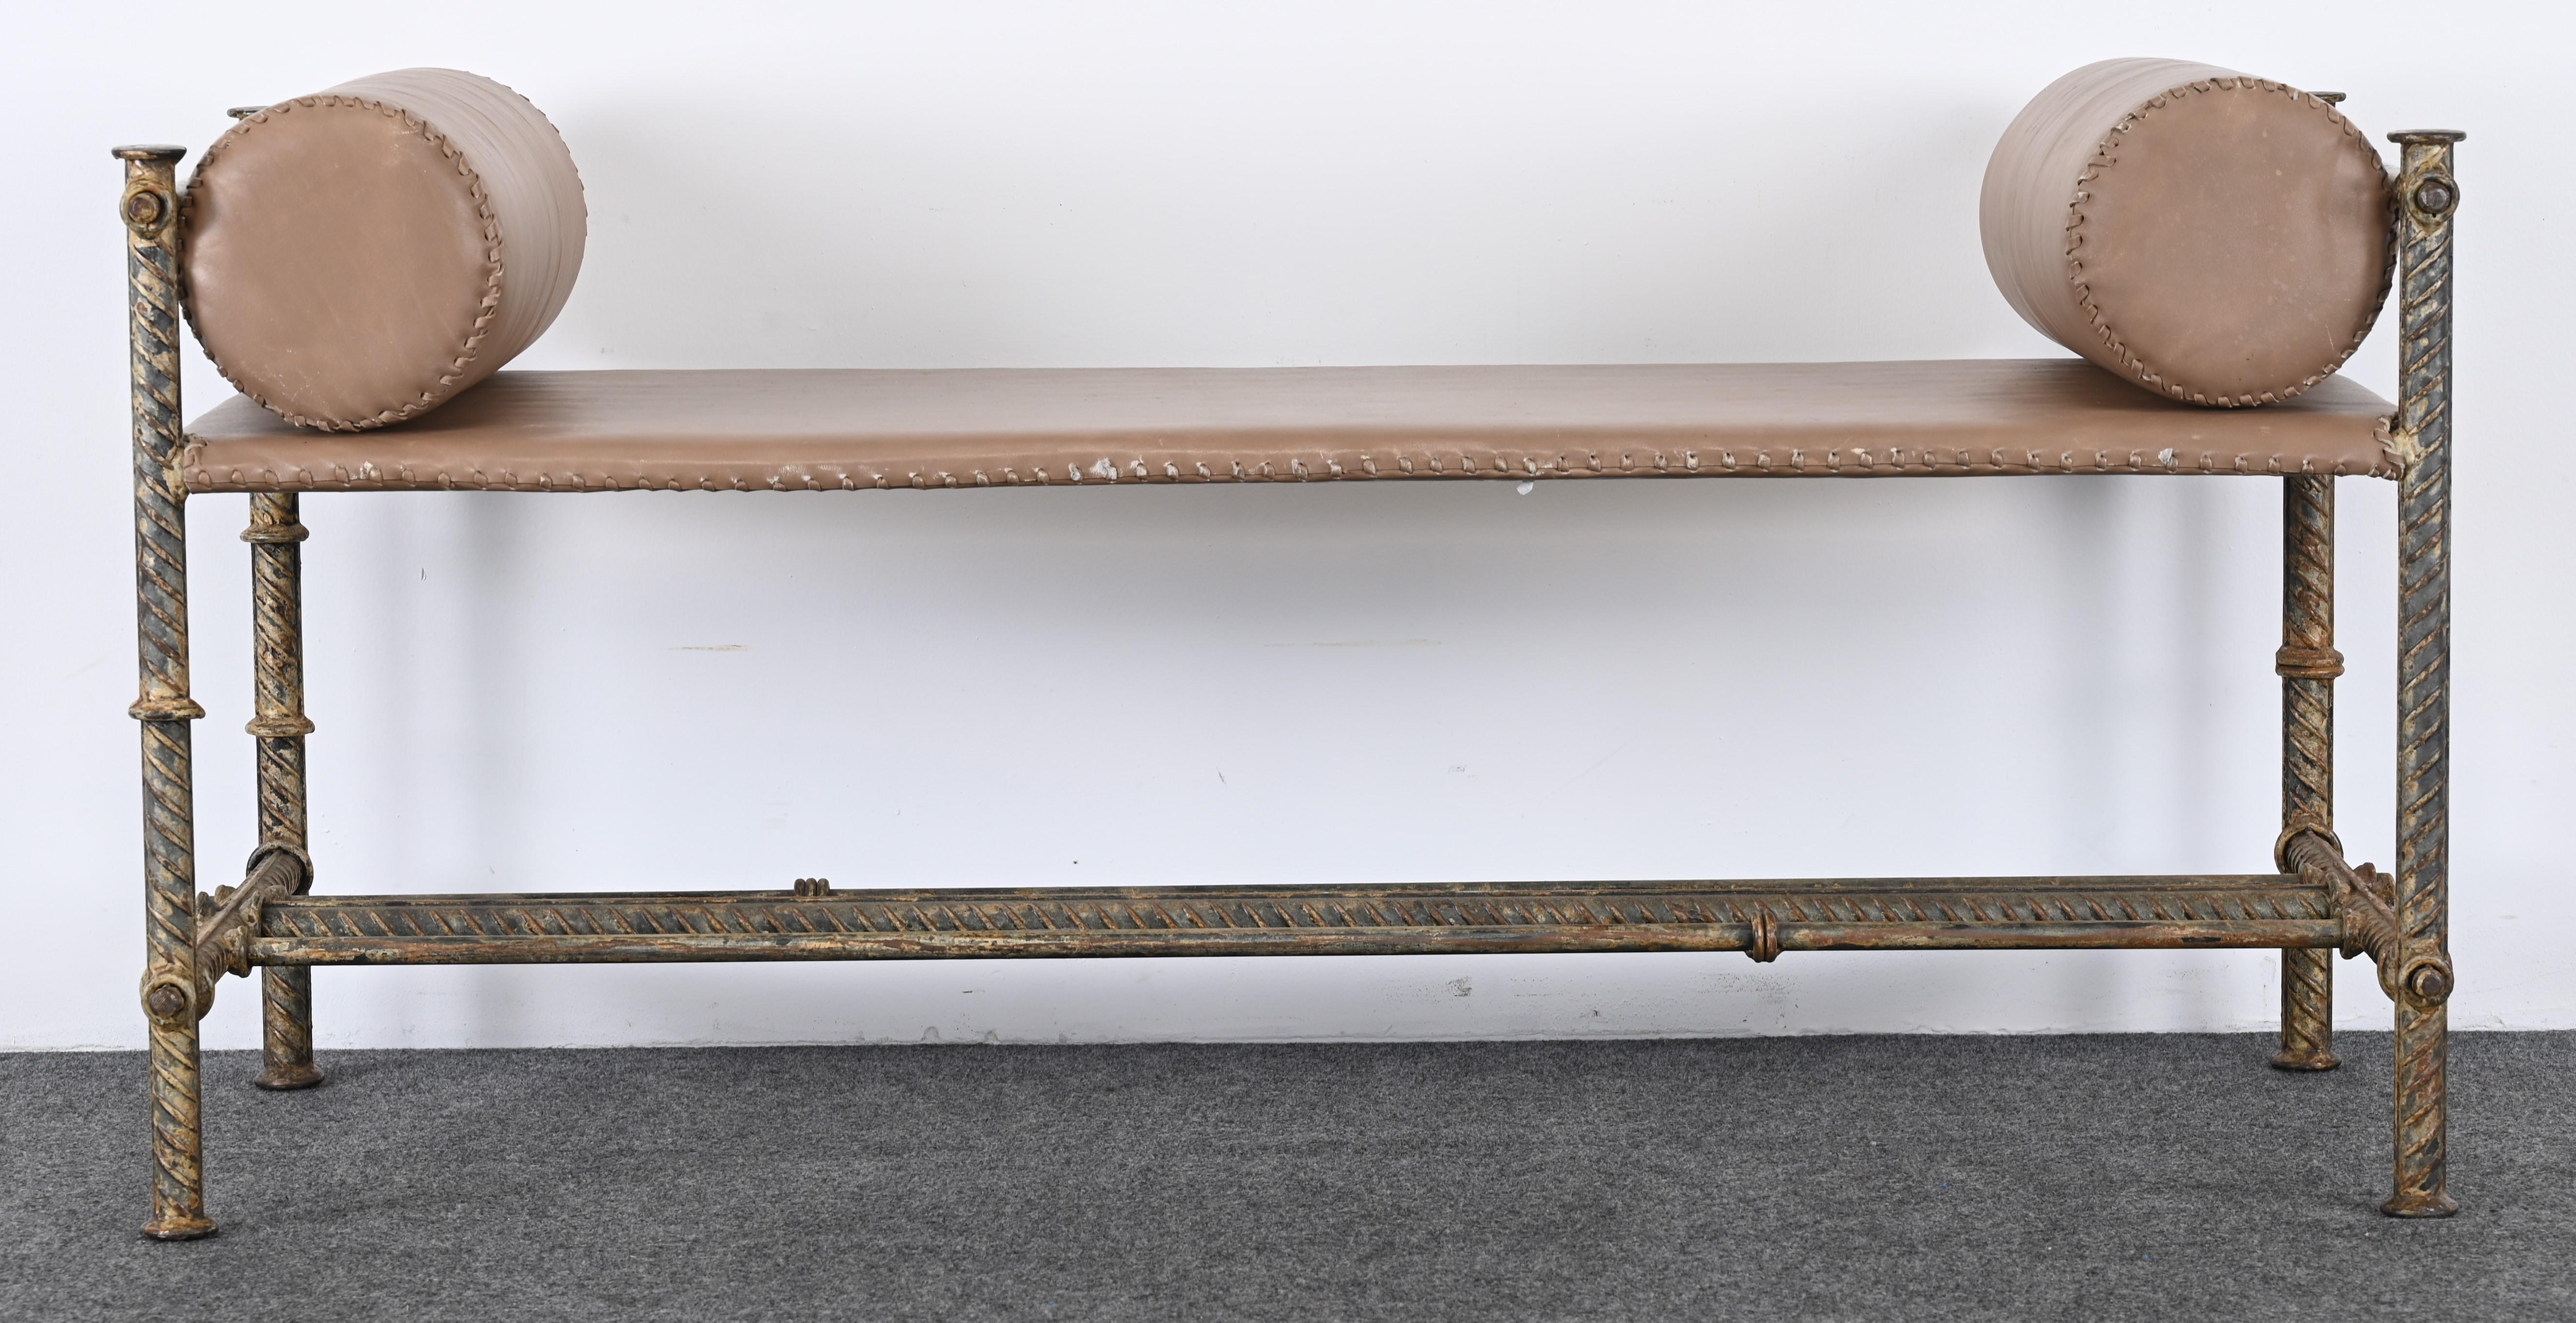 A handsome steel rebar bench with leather seats and bolsters. This bench has an industrial feel to the design but also mimics other artists of the era, such as Diego Giacometti, Tom Corbin, and others. The bench is covered in leather with a cowboy